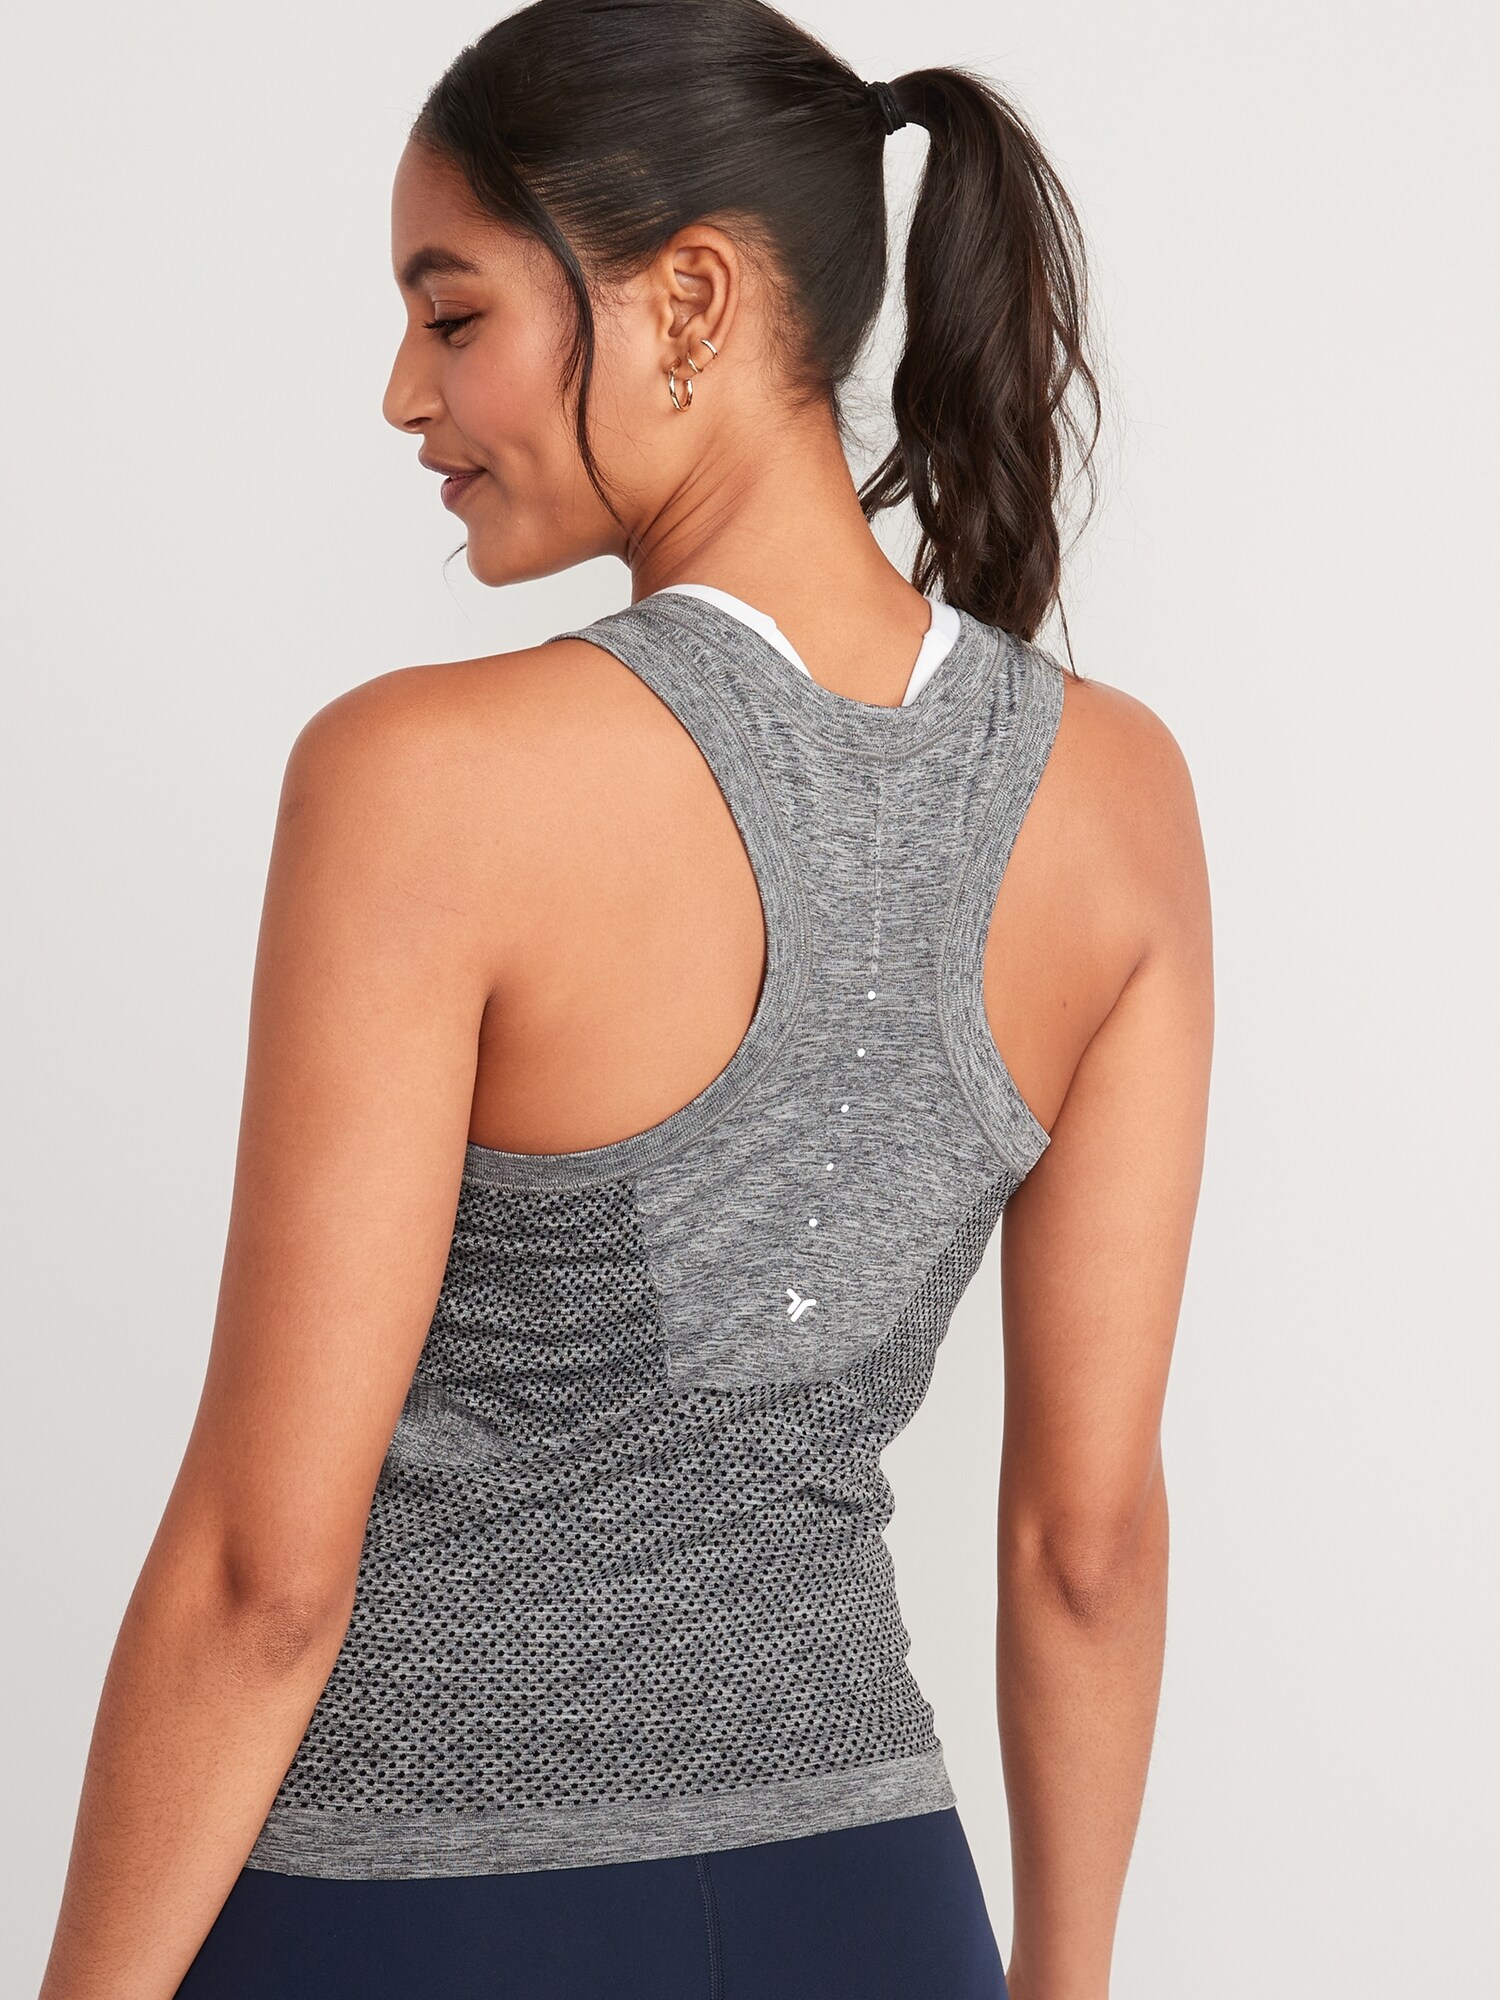 Seamless Performance Racerback Tank Top for Women, Old Navy